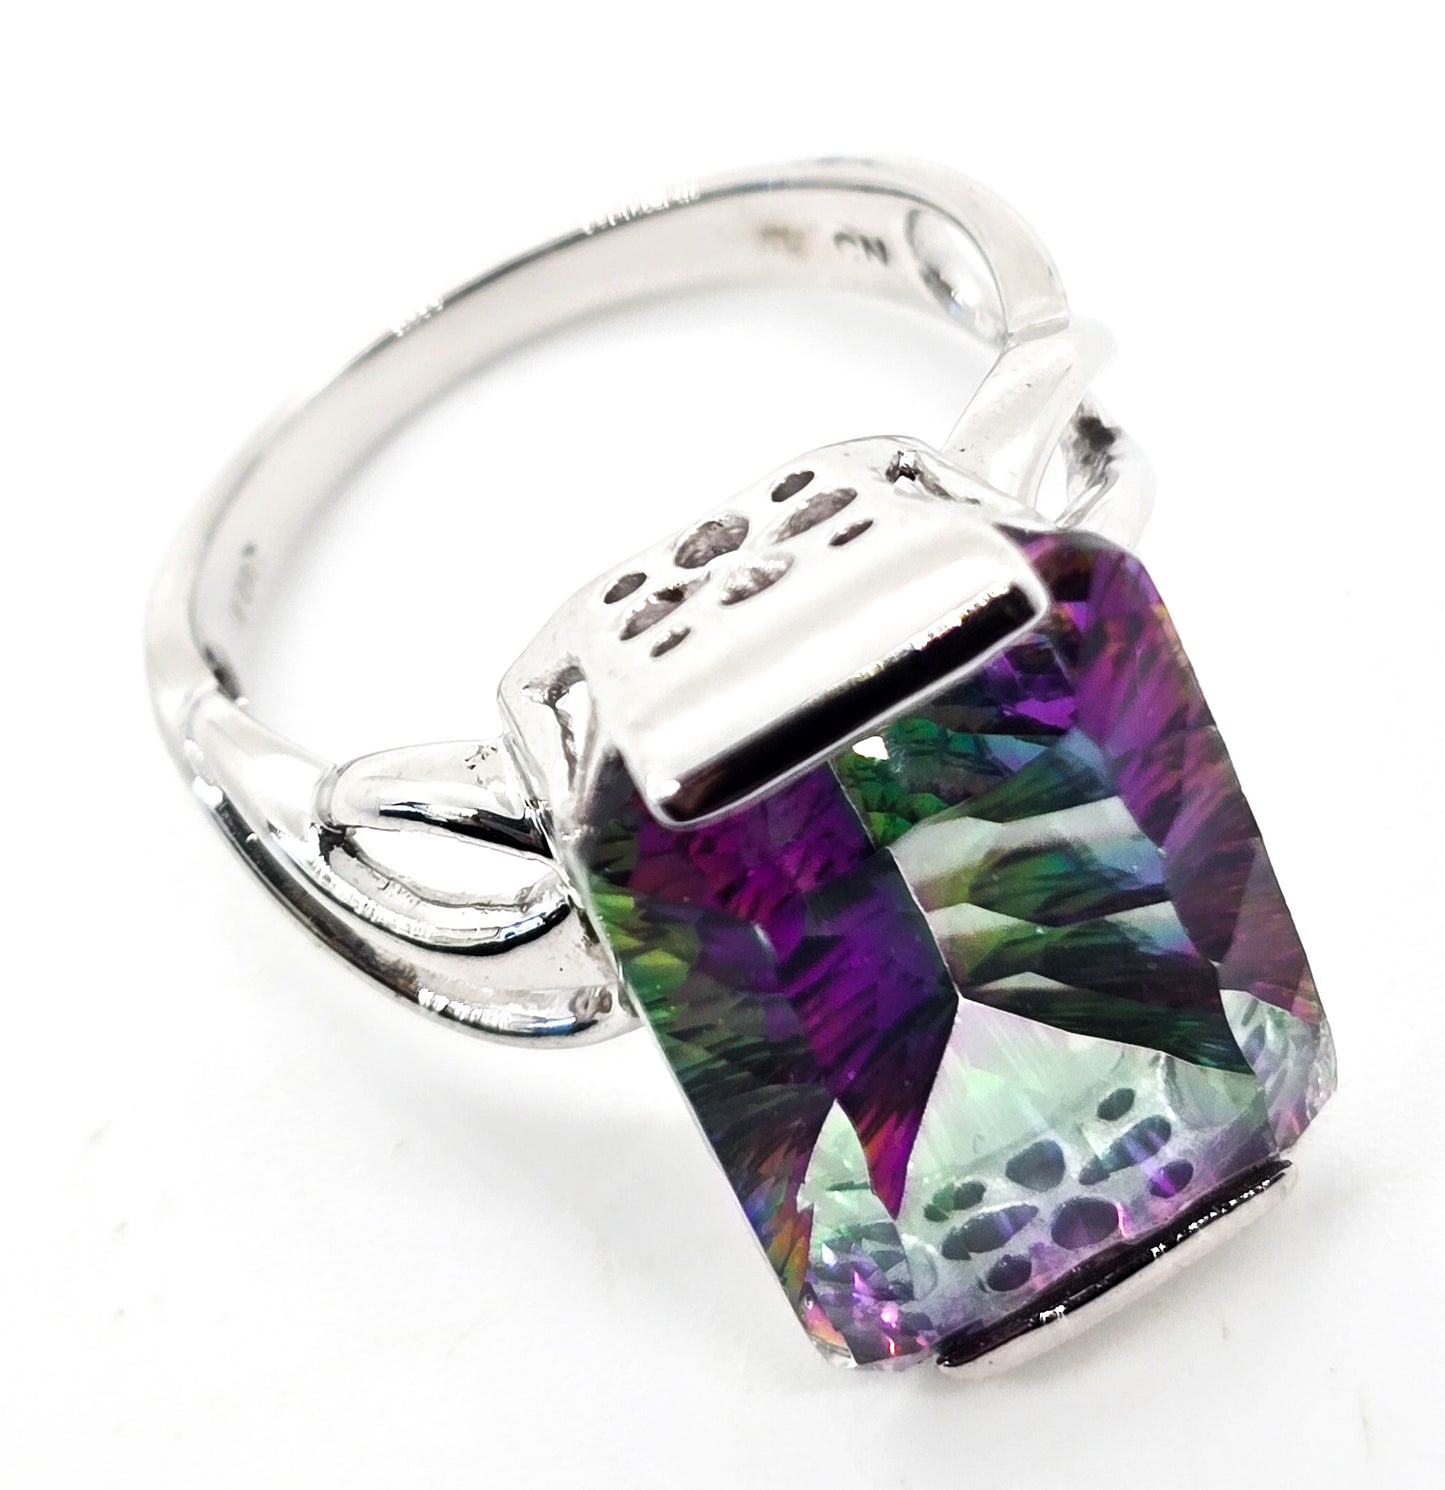 Mystic topaz Large 13ct Heart setting rhodium over sterling silver ring LUC size 10.5